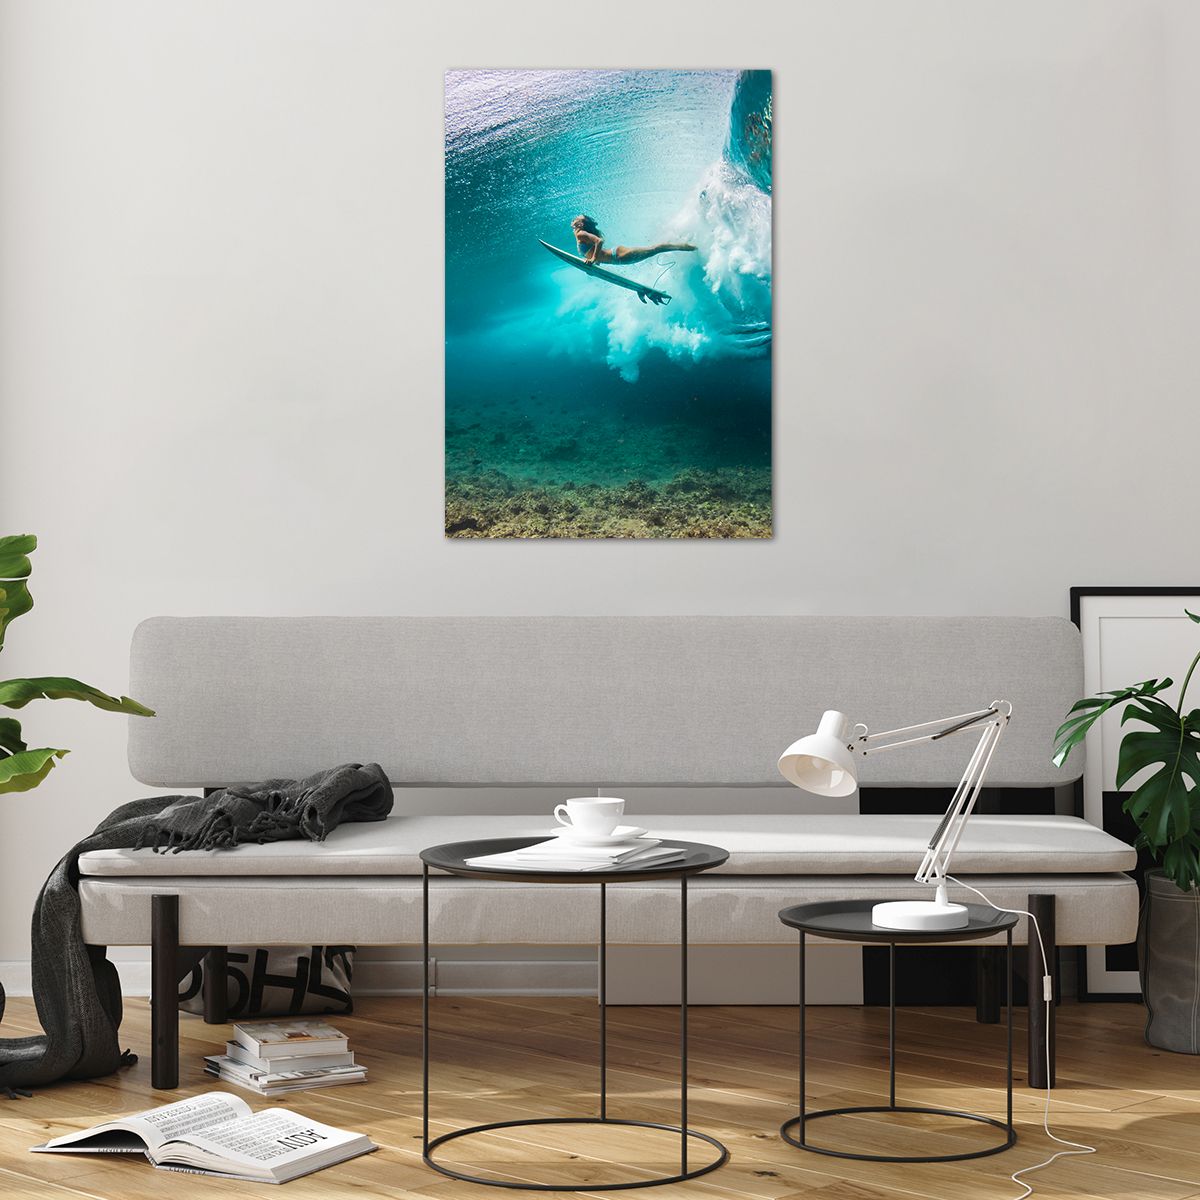 Glass picture  Surfing, Glass picture  Underwater World, Glass picture  Woman, Glass picture  Ocean, Glass picture  Sport